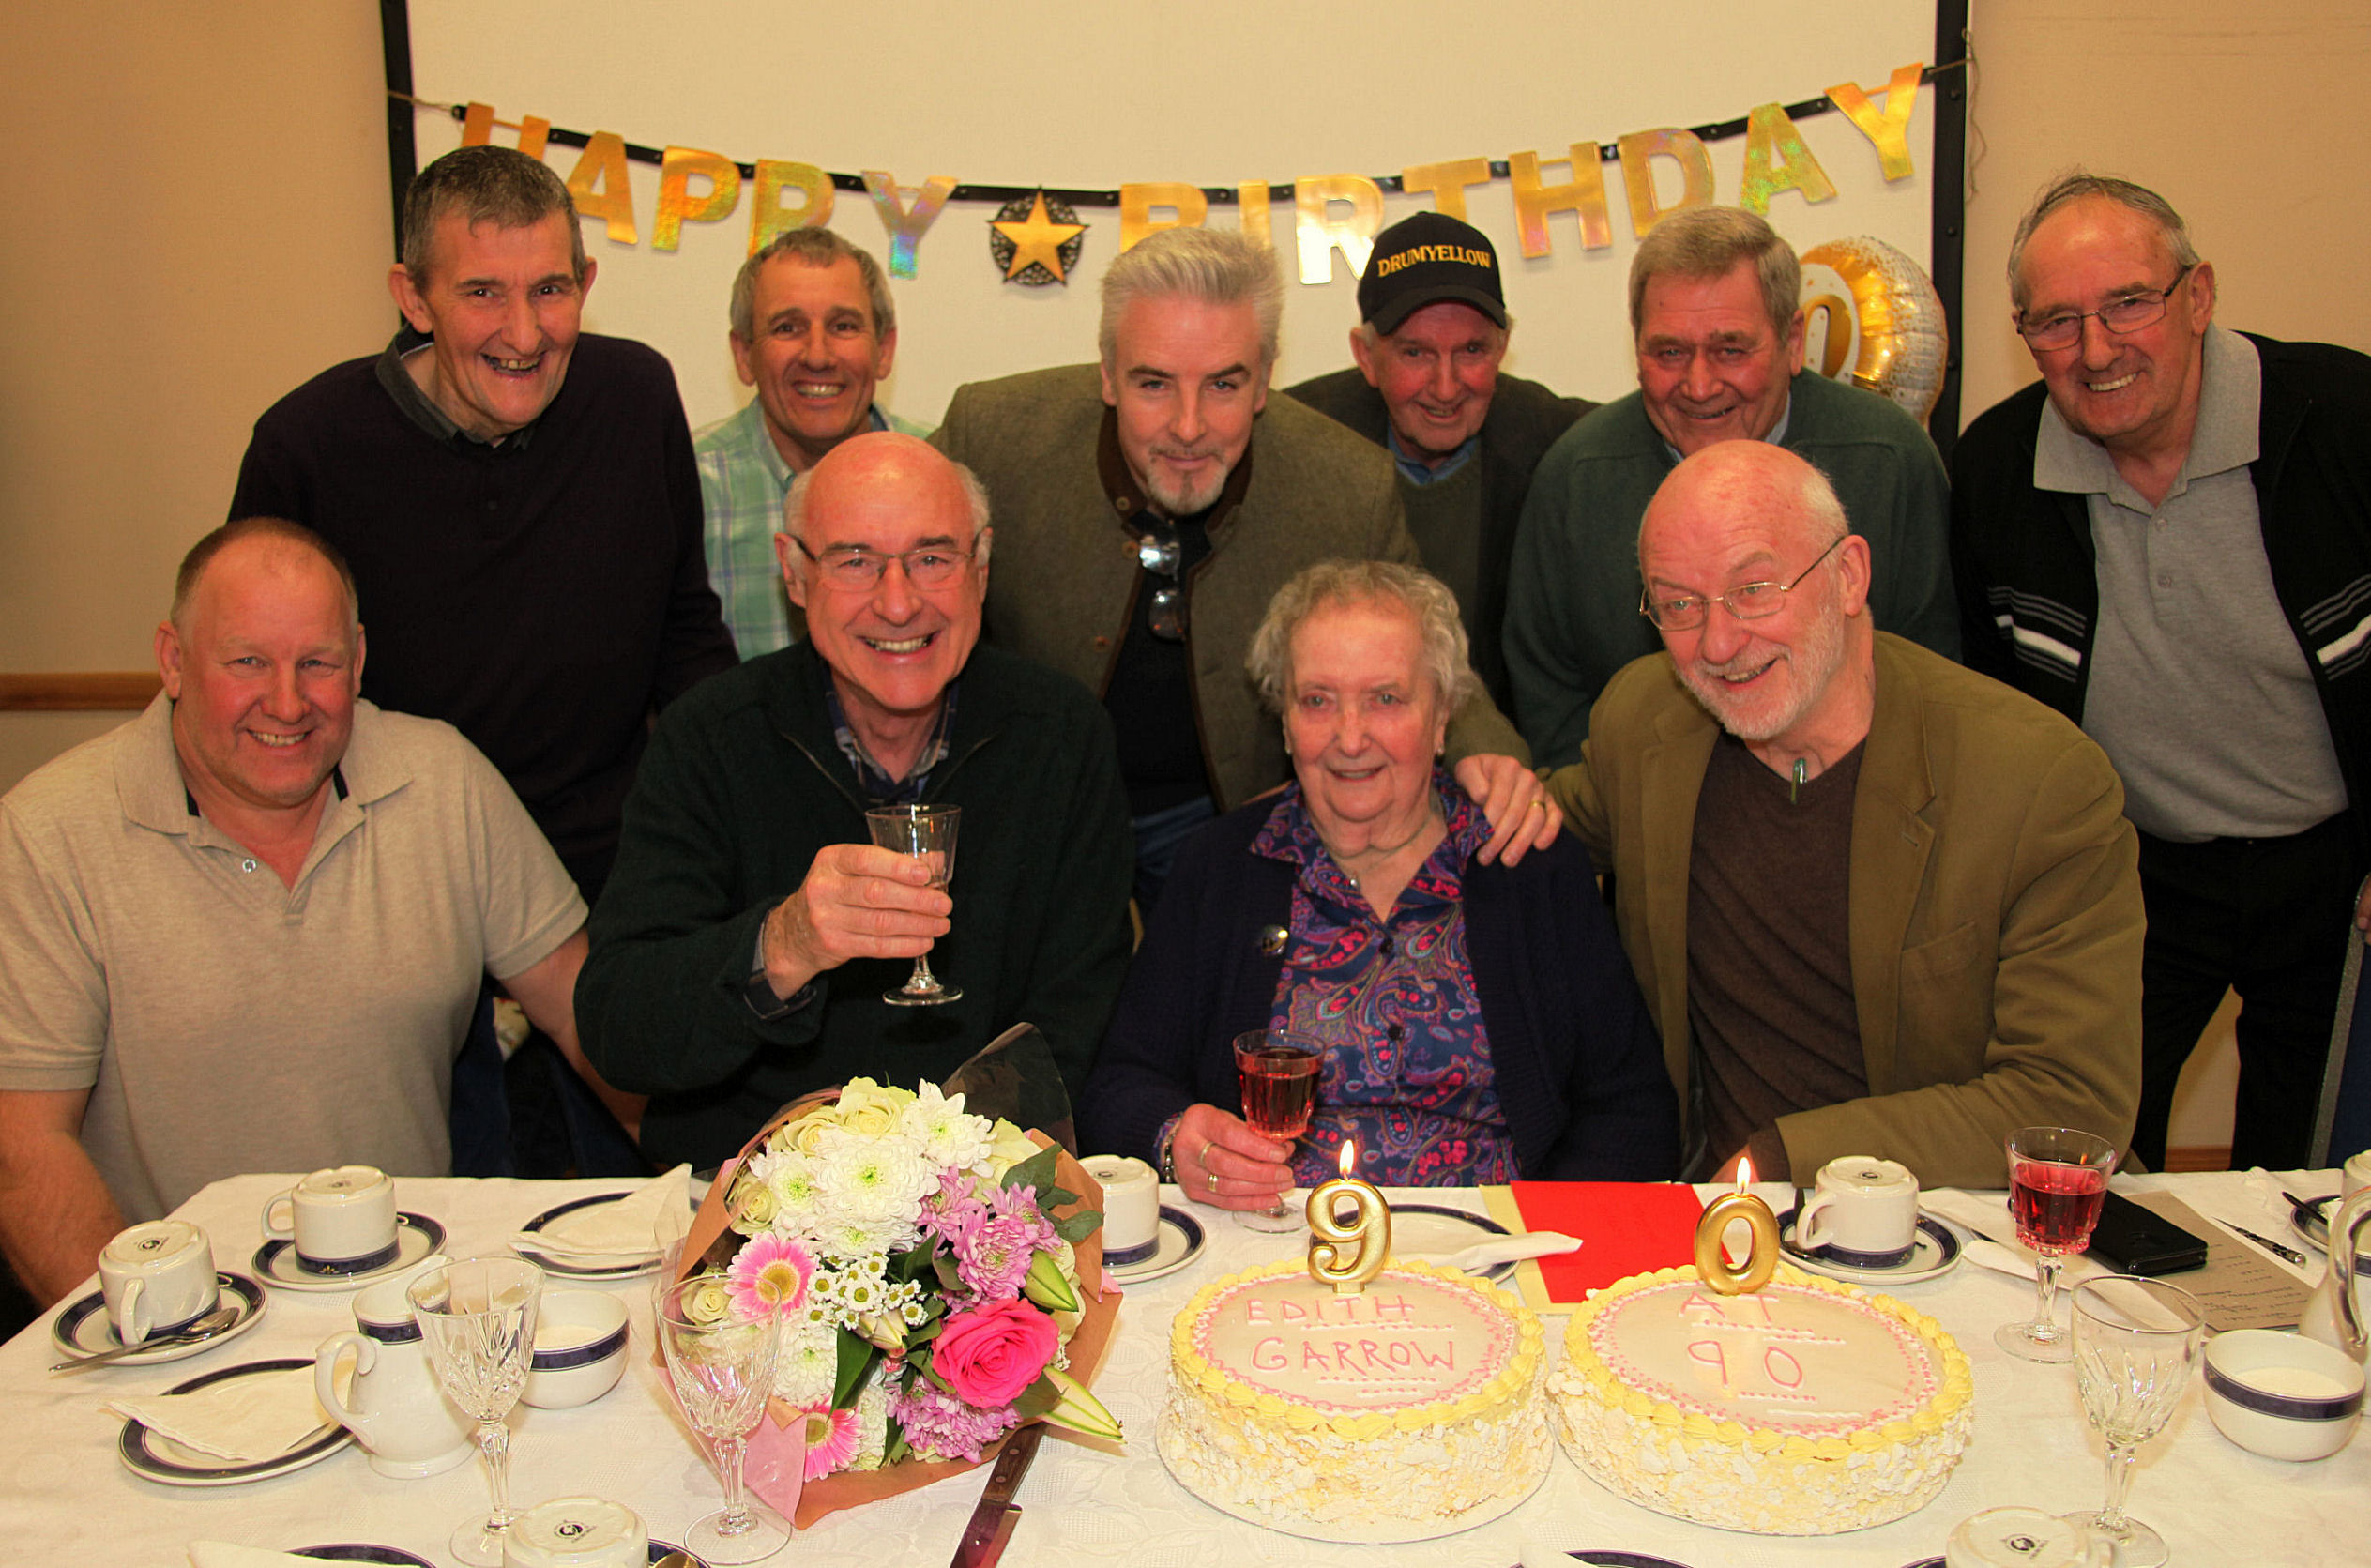 Edith Garrow enjoyed a party with her nephews and former pupils